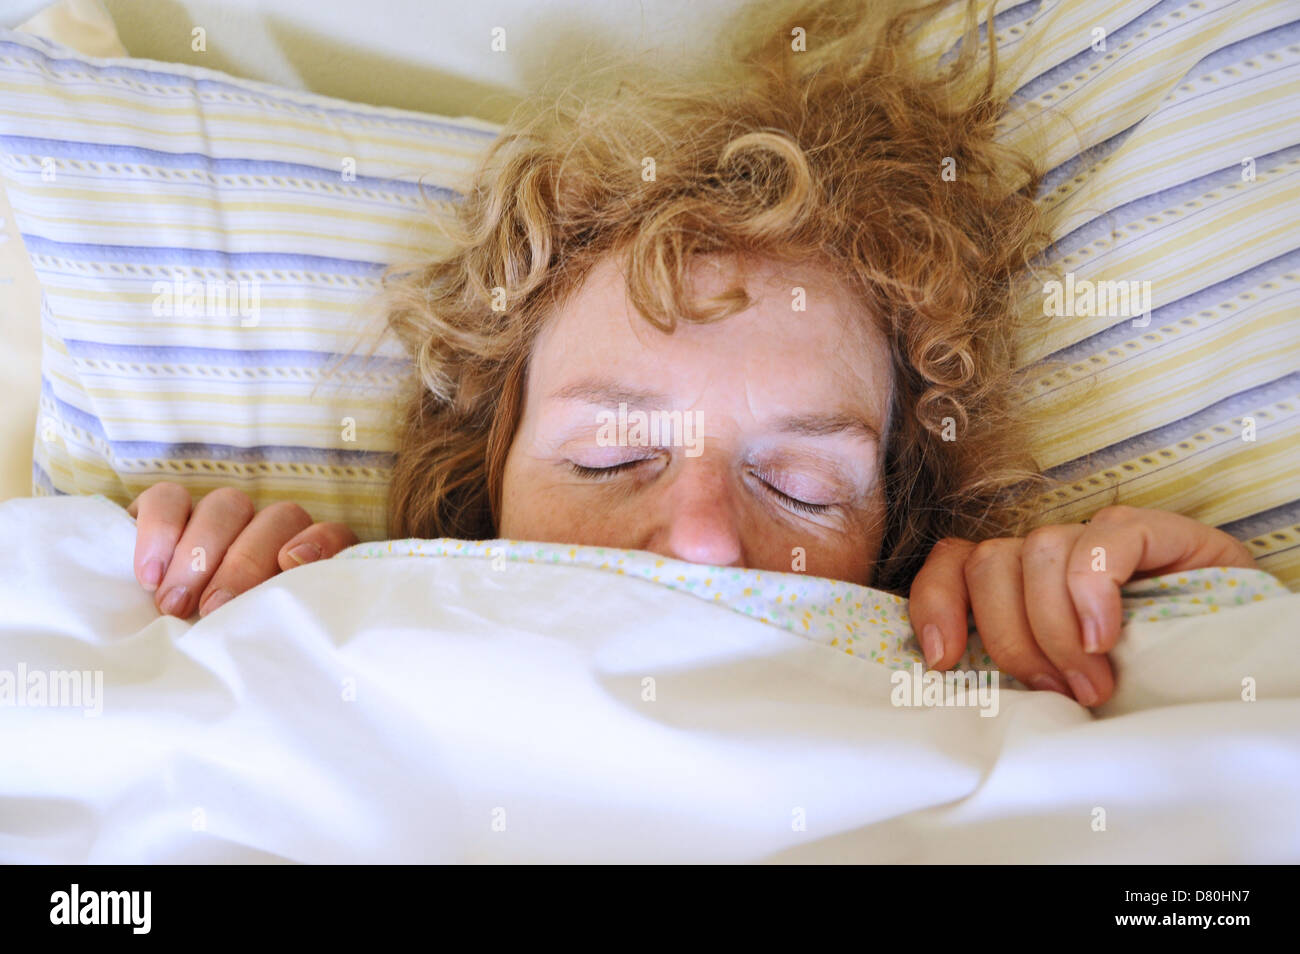 woman 50s lying asleep under the bed covers with top of head and eyes poking out Stock Photo